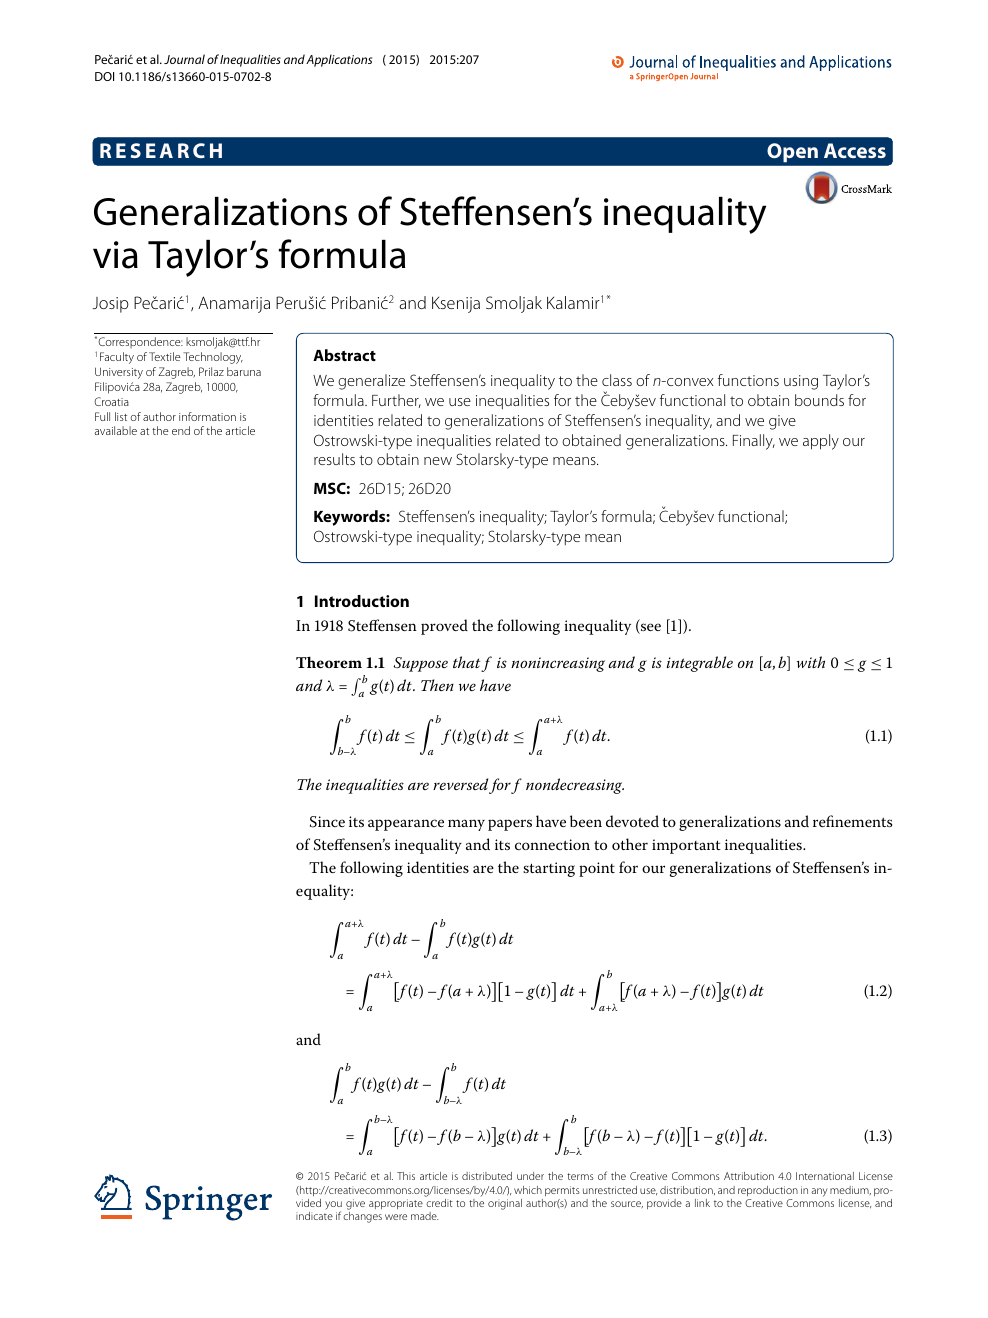 Generalizations Of Steffensen S Inequality Via Taylor S Formula Topic Of Research Paper In Mathematics Download Scholarly Article Pdf And Read For Free On Cyberleninka Open Science Hub